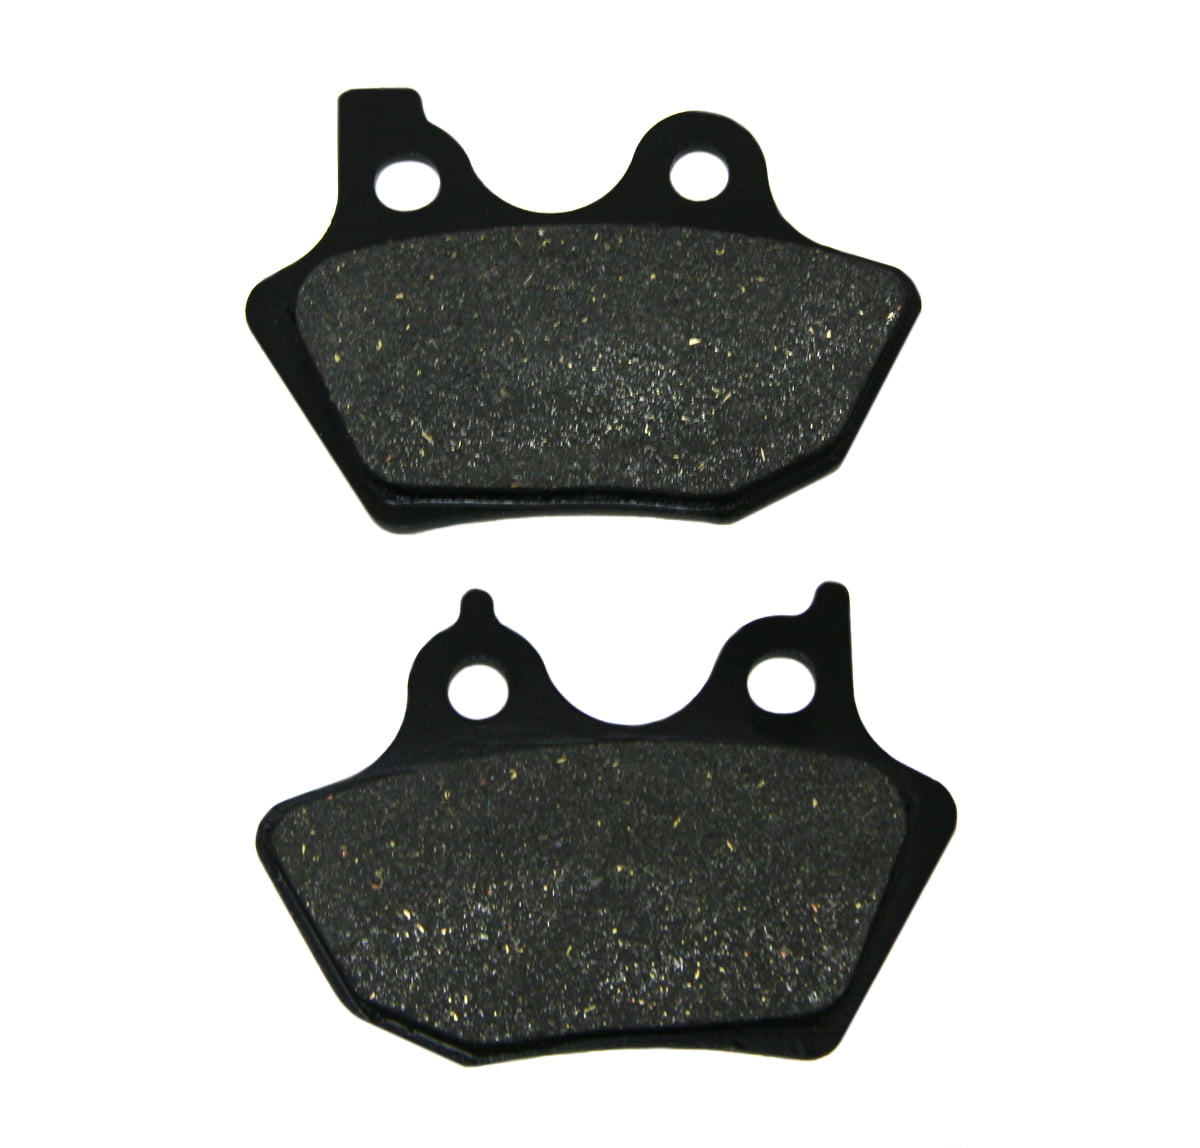 ECCPP FA381 Brake Pads Front and Rear Carbon Fiber Replacement Brake Pads Kits Fit for Harley-Davidson Sportster 1200 Custom XL1200C 2004-2012 